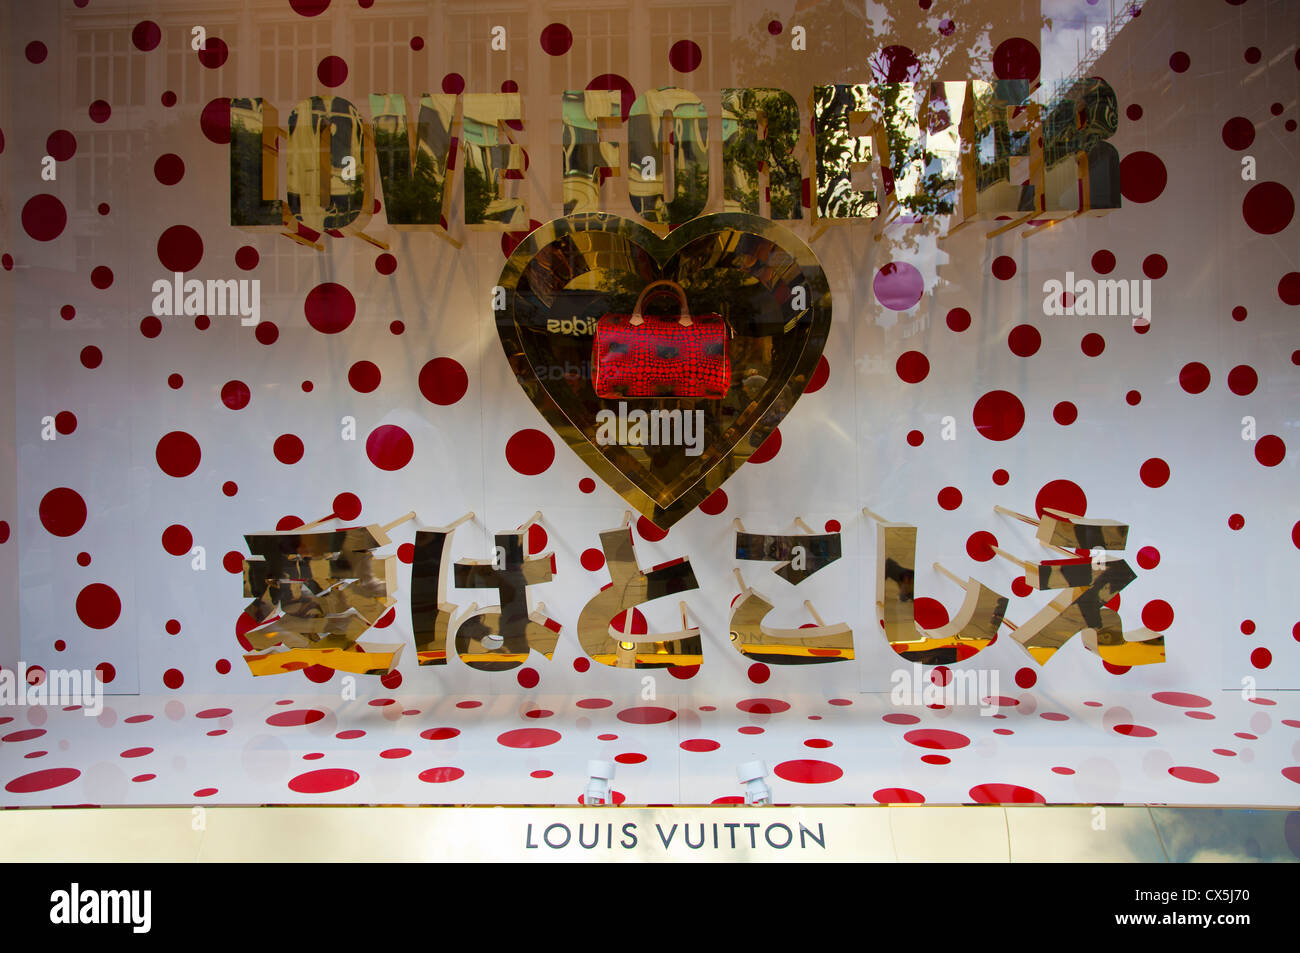 Polka Dot Person, Louis Vuitton window display done in coll…